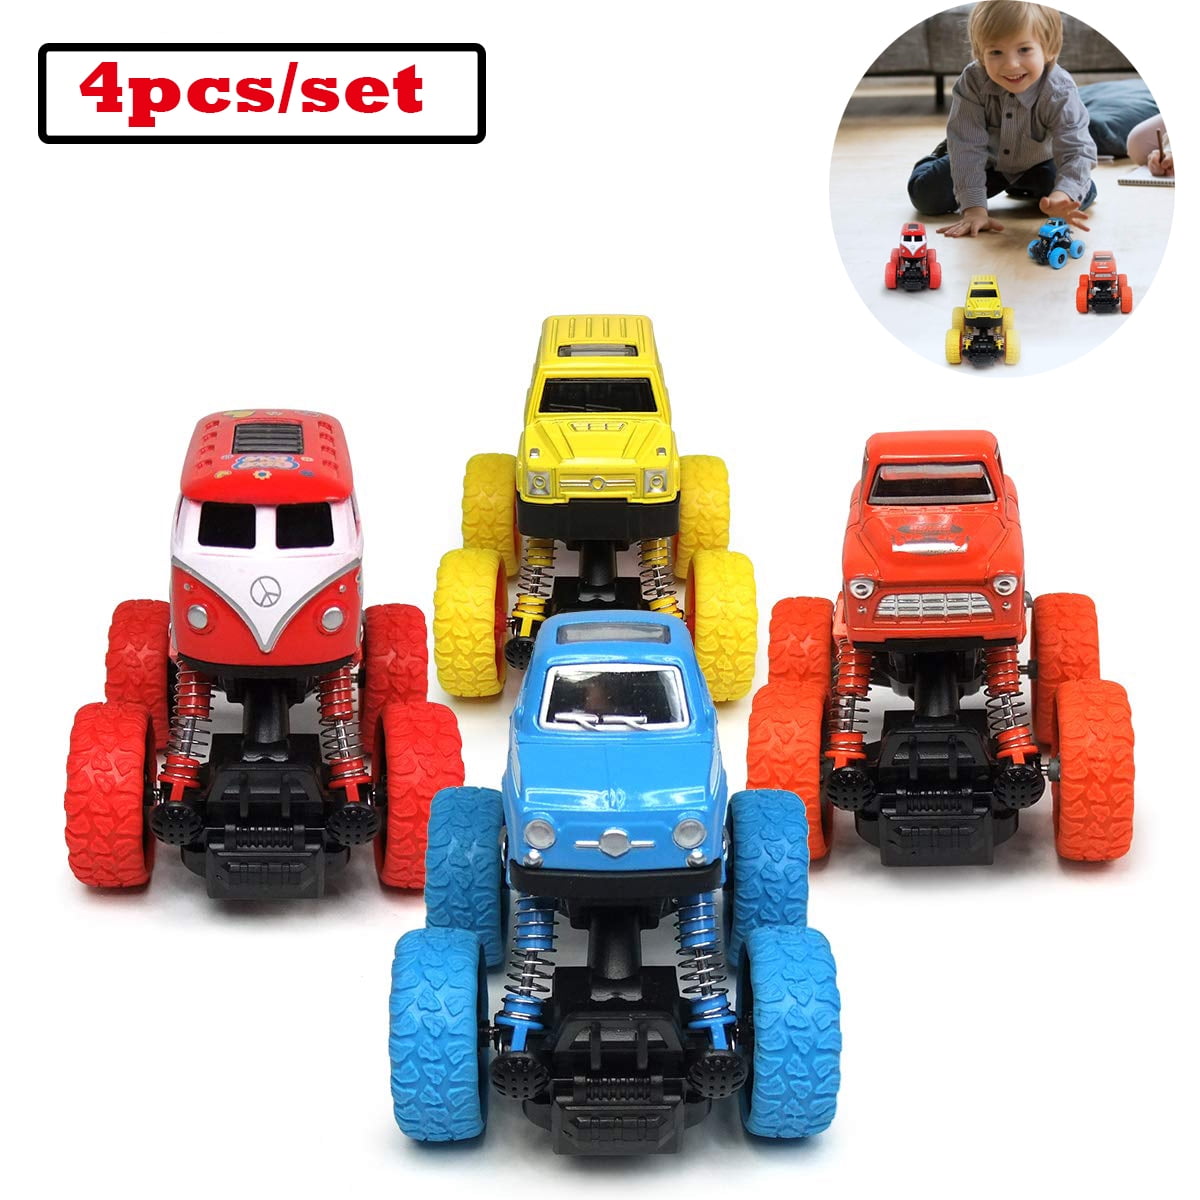 Kids Toys 8 Pieces Baby Toy Spinning Top Small Toy Car for 4-5 Year Old Boy Girl Birthday Gift Set 